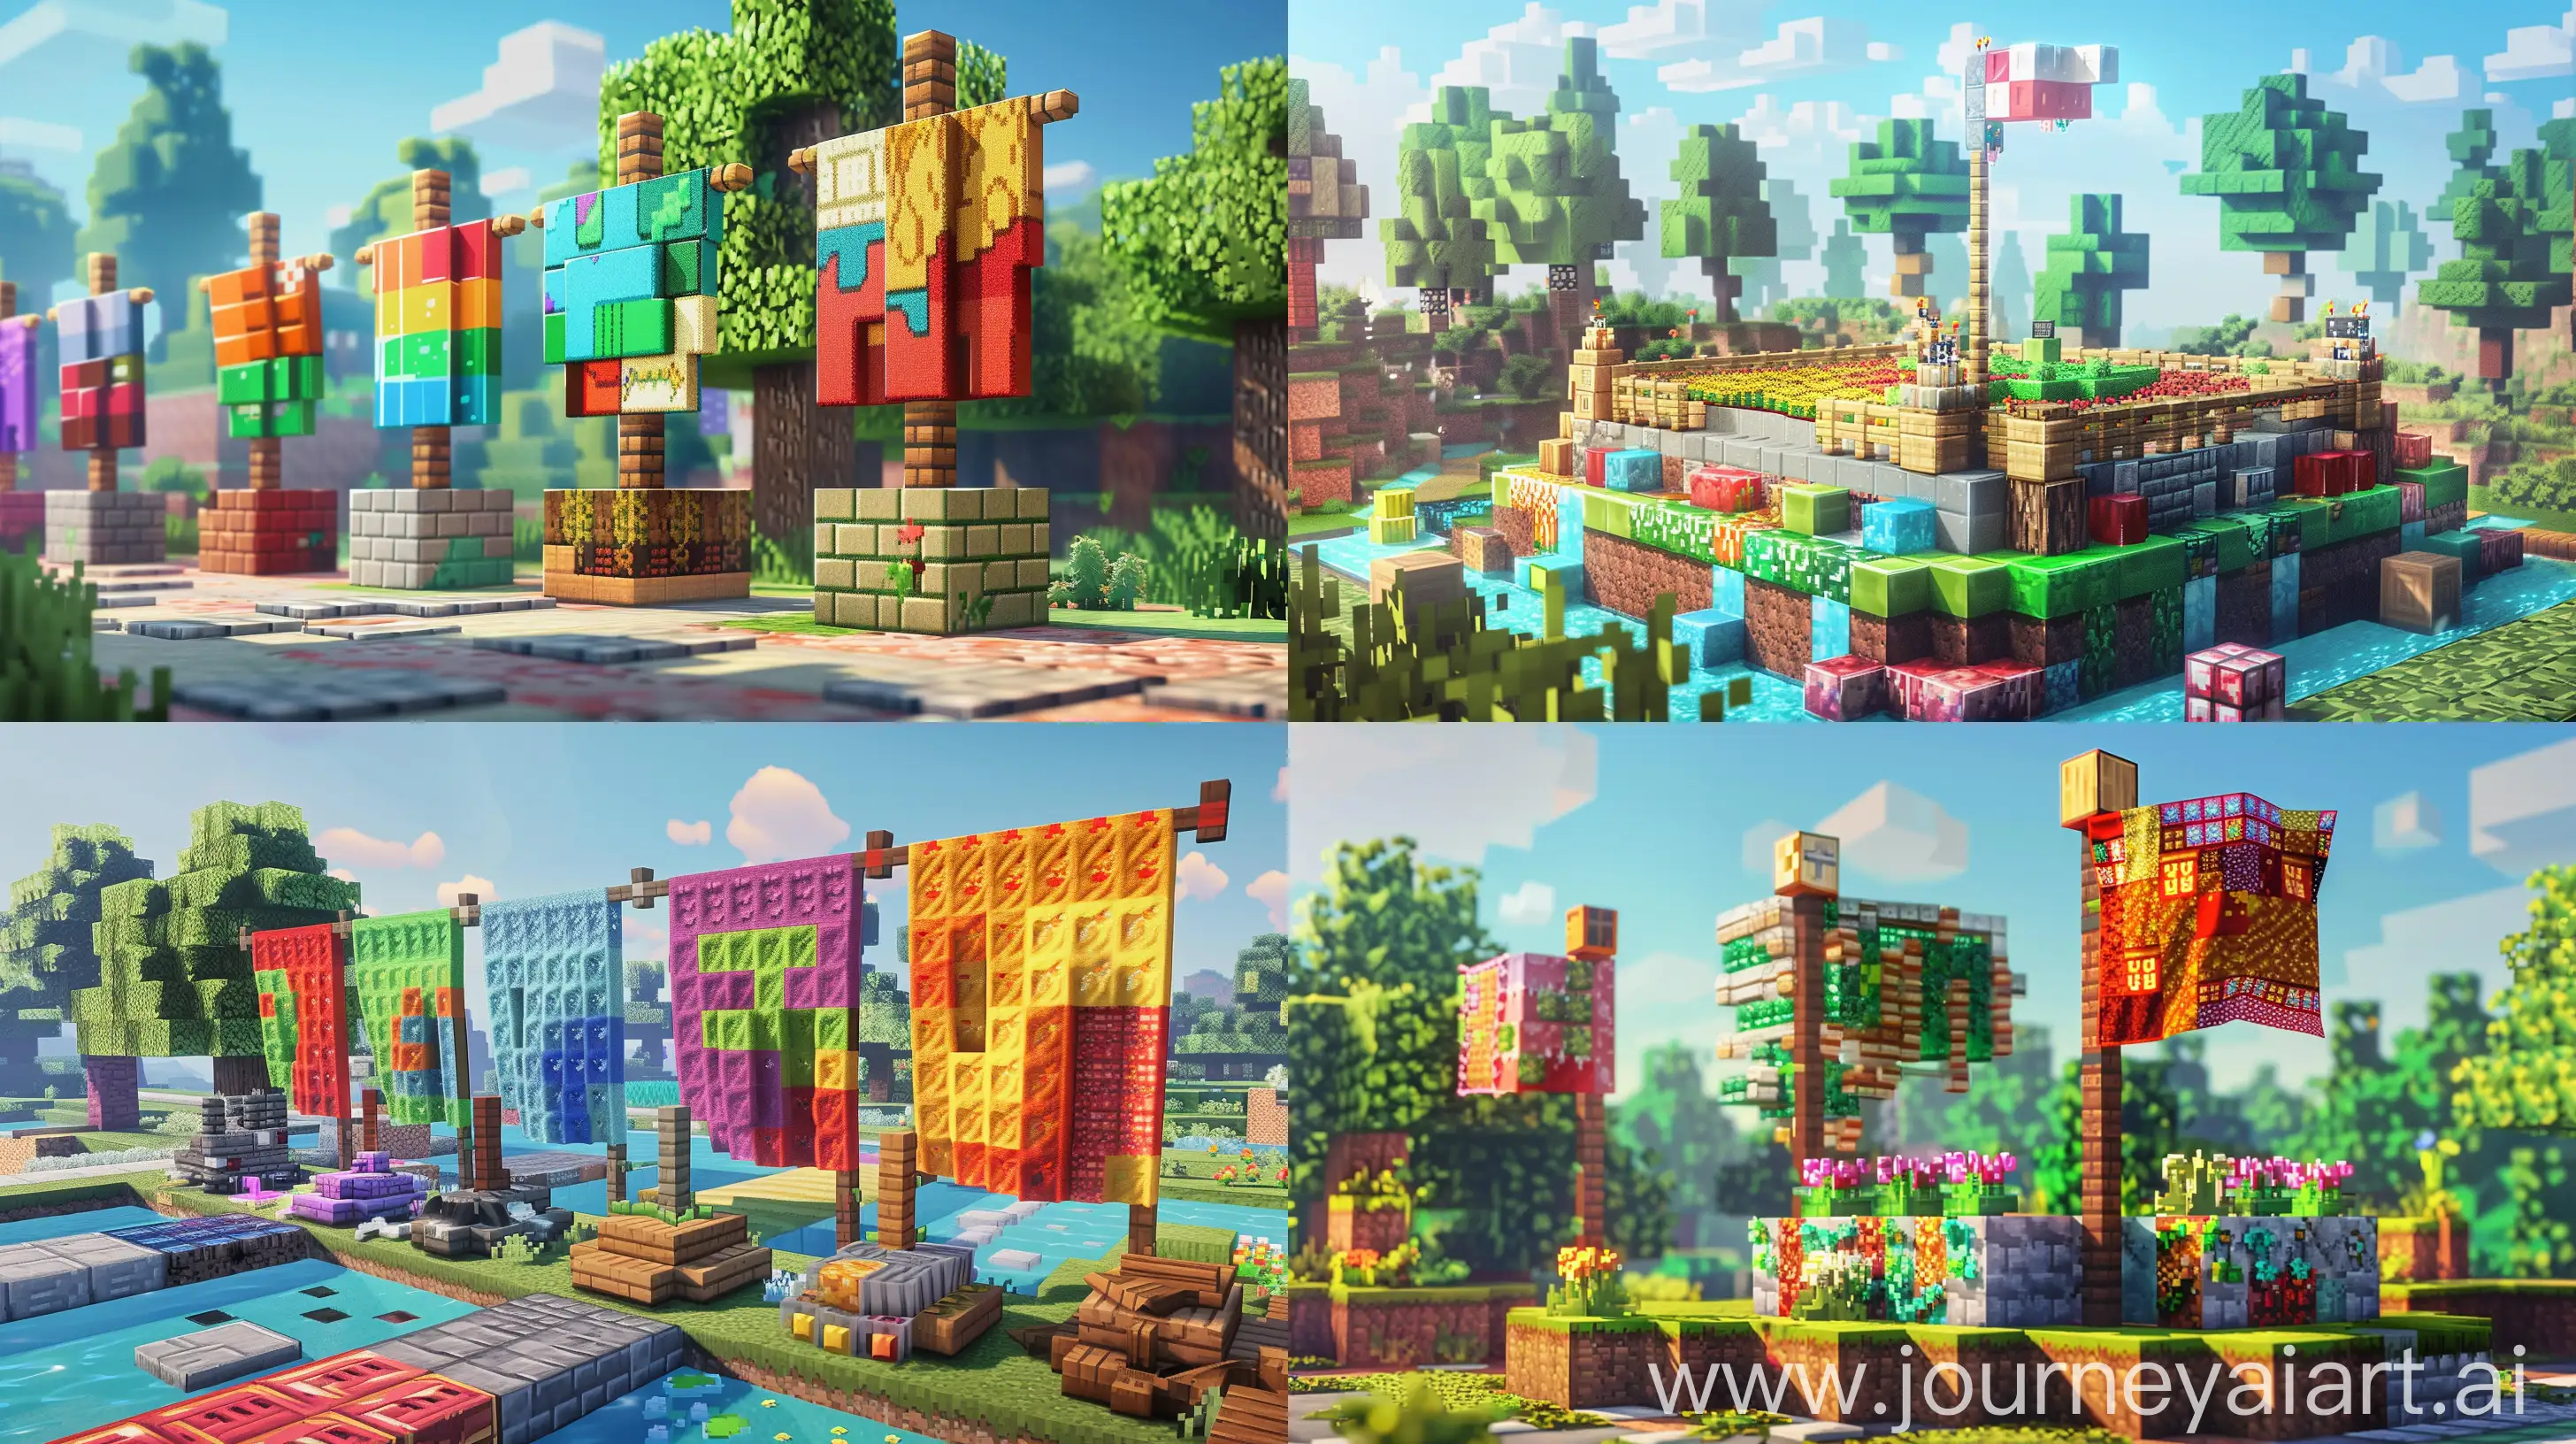 An intricate digital painting illustrating the step-by-step process of creating a basic flag in Minecraft, capturing the initial setup of the crafting area with neatly arranged blocks representing various materials like wool and wood. As the scene progresses, it showcases the construction of the flag's base with vibrant and distinct Minecraft blocks, each layer meticulously placed to form a sturdy structure. The final stages highlight the addition of intricate details and decorations, enhancing the flag with colorful patterns and textures that give it a unique character. The composition balances a vivid, playful color palette with clear, dynamic lighting, focusing on the detailed textures of the Minecraft blocks, set against a background of a typical Minecraft landscape with pixelated trees and a clear blue sky, evoking a sense of creativity and adventure in a virtual world. --ar 16:9 